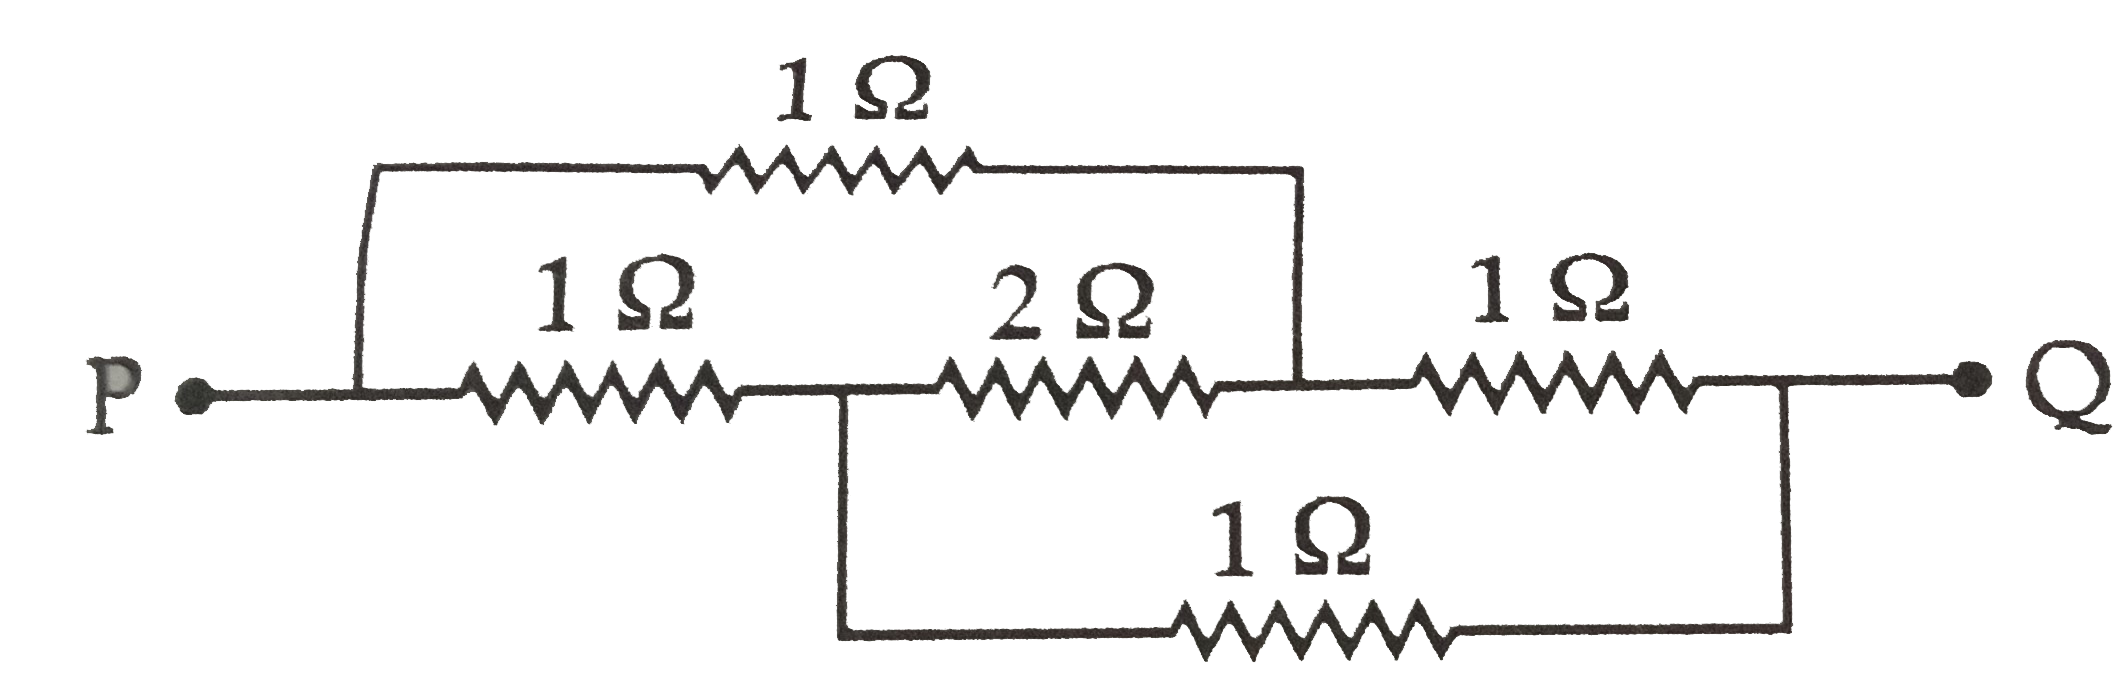 The equivalent resistance across P and Q in the given electric circuit will be